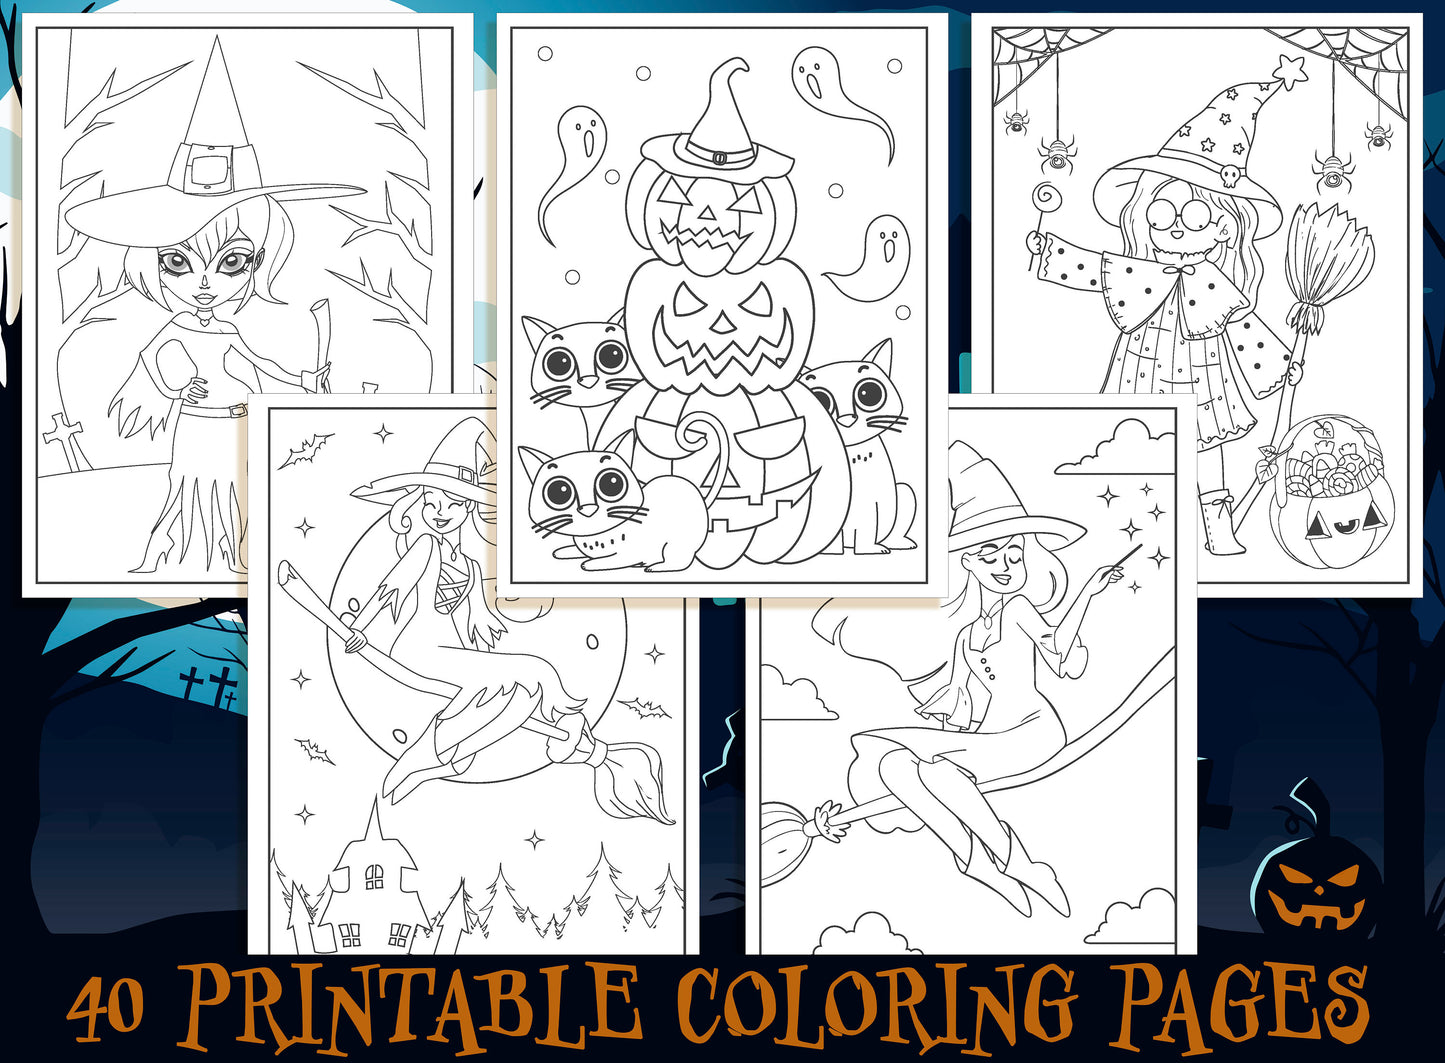 Witch Coloring Pages - 40 Printable Witch Coloring Pages for Kids, Girls, Boys, Teens. Witch & Halloween Party Activity - Instant Download.